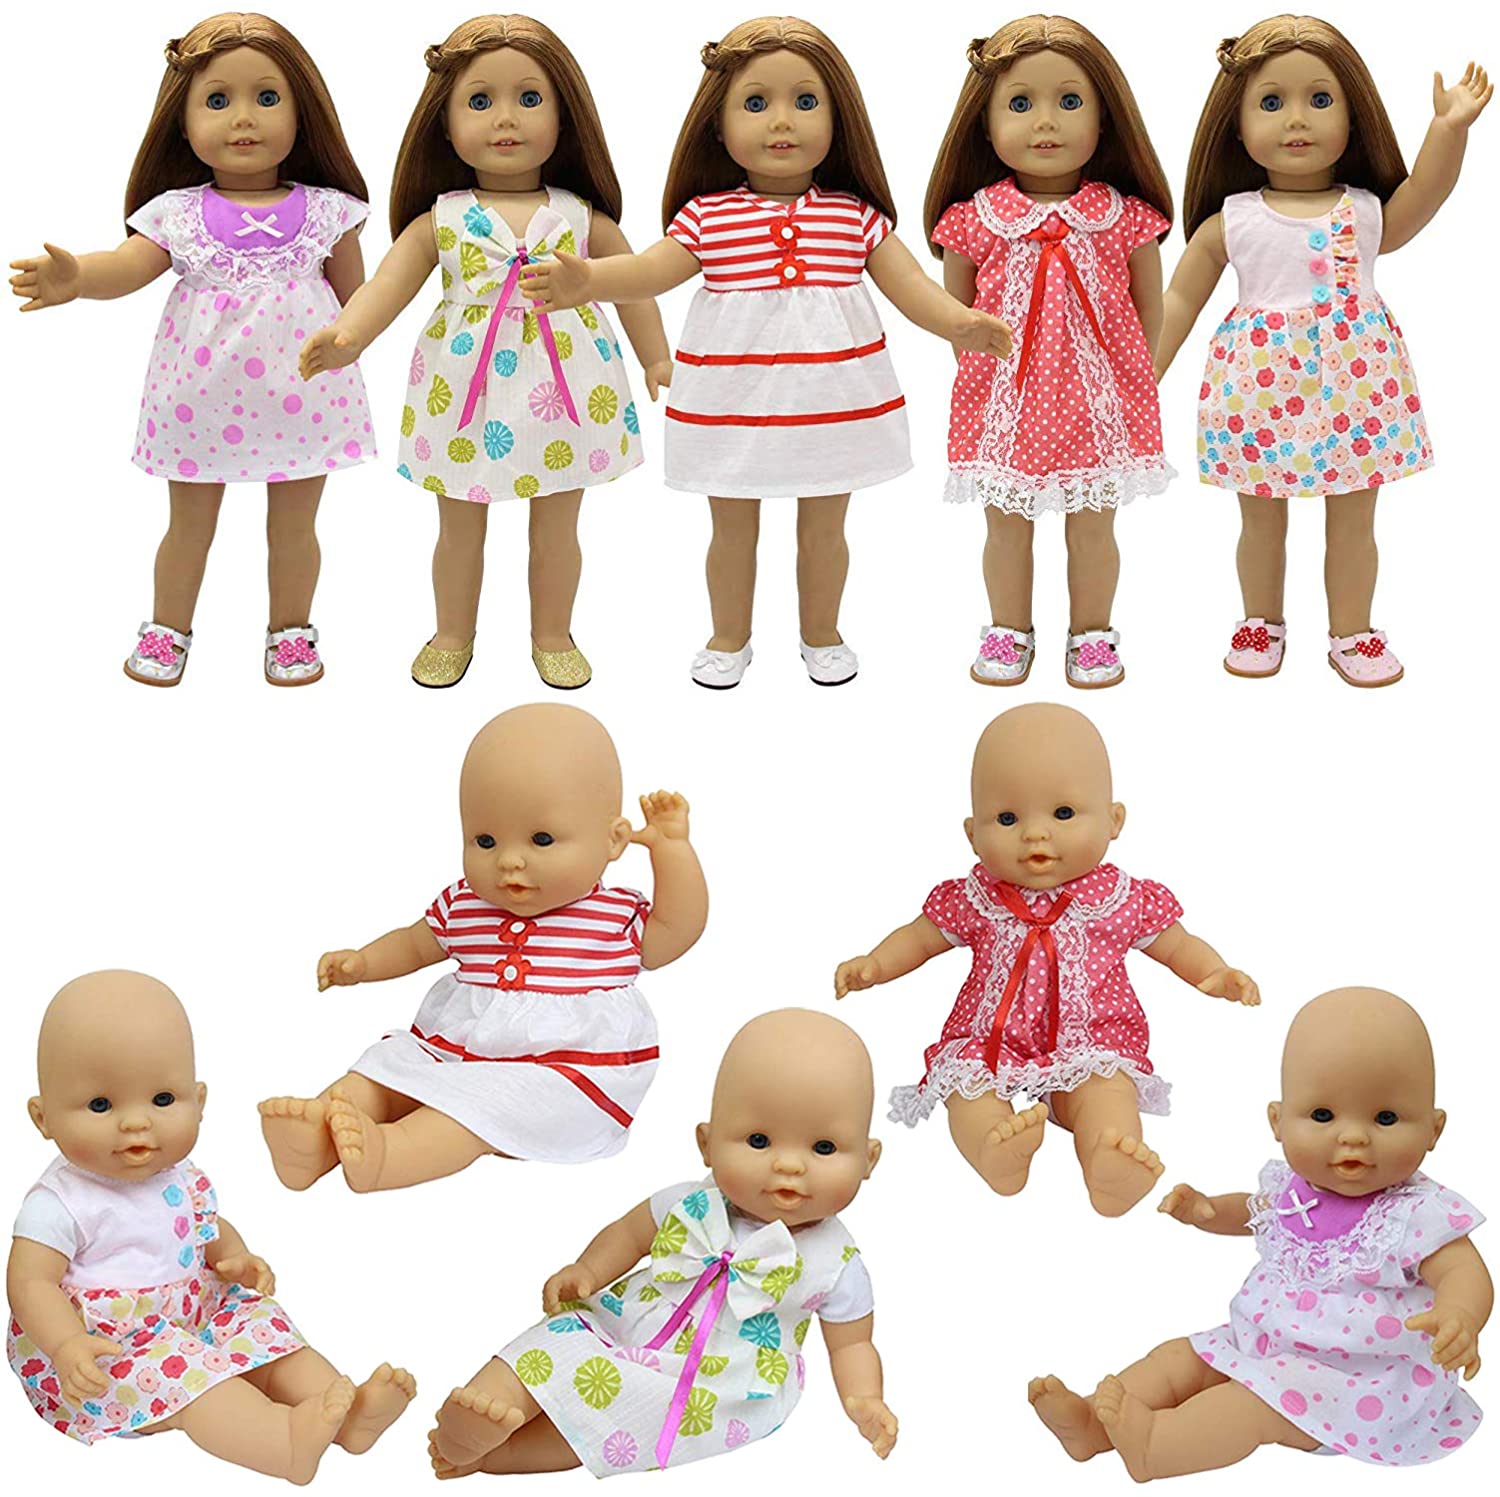 ZITA ELEMENT 10 Sets 14 - 16 Inch Baby Doll Clothes India